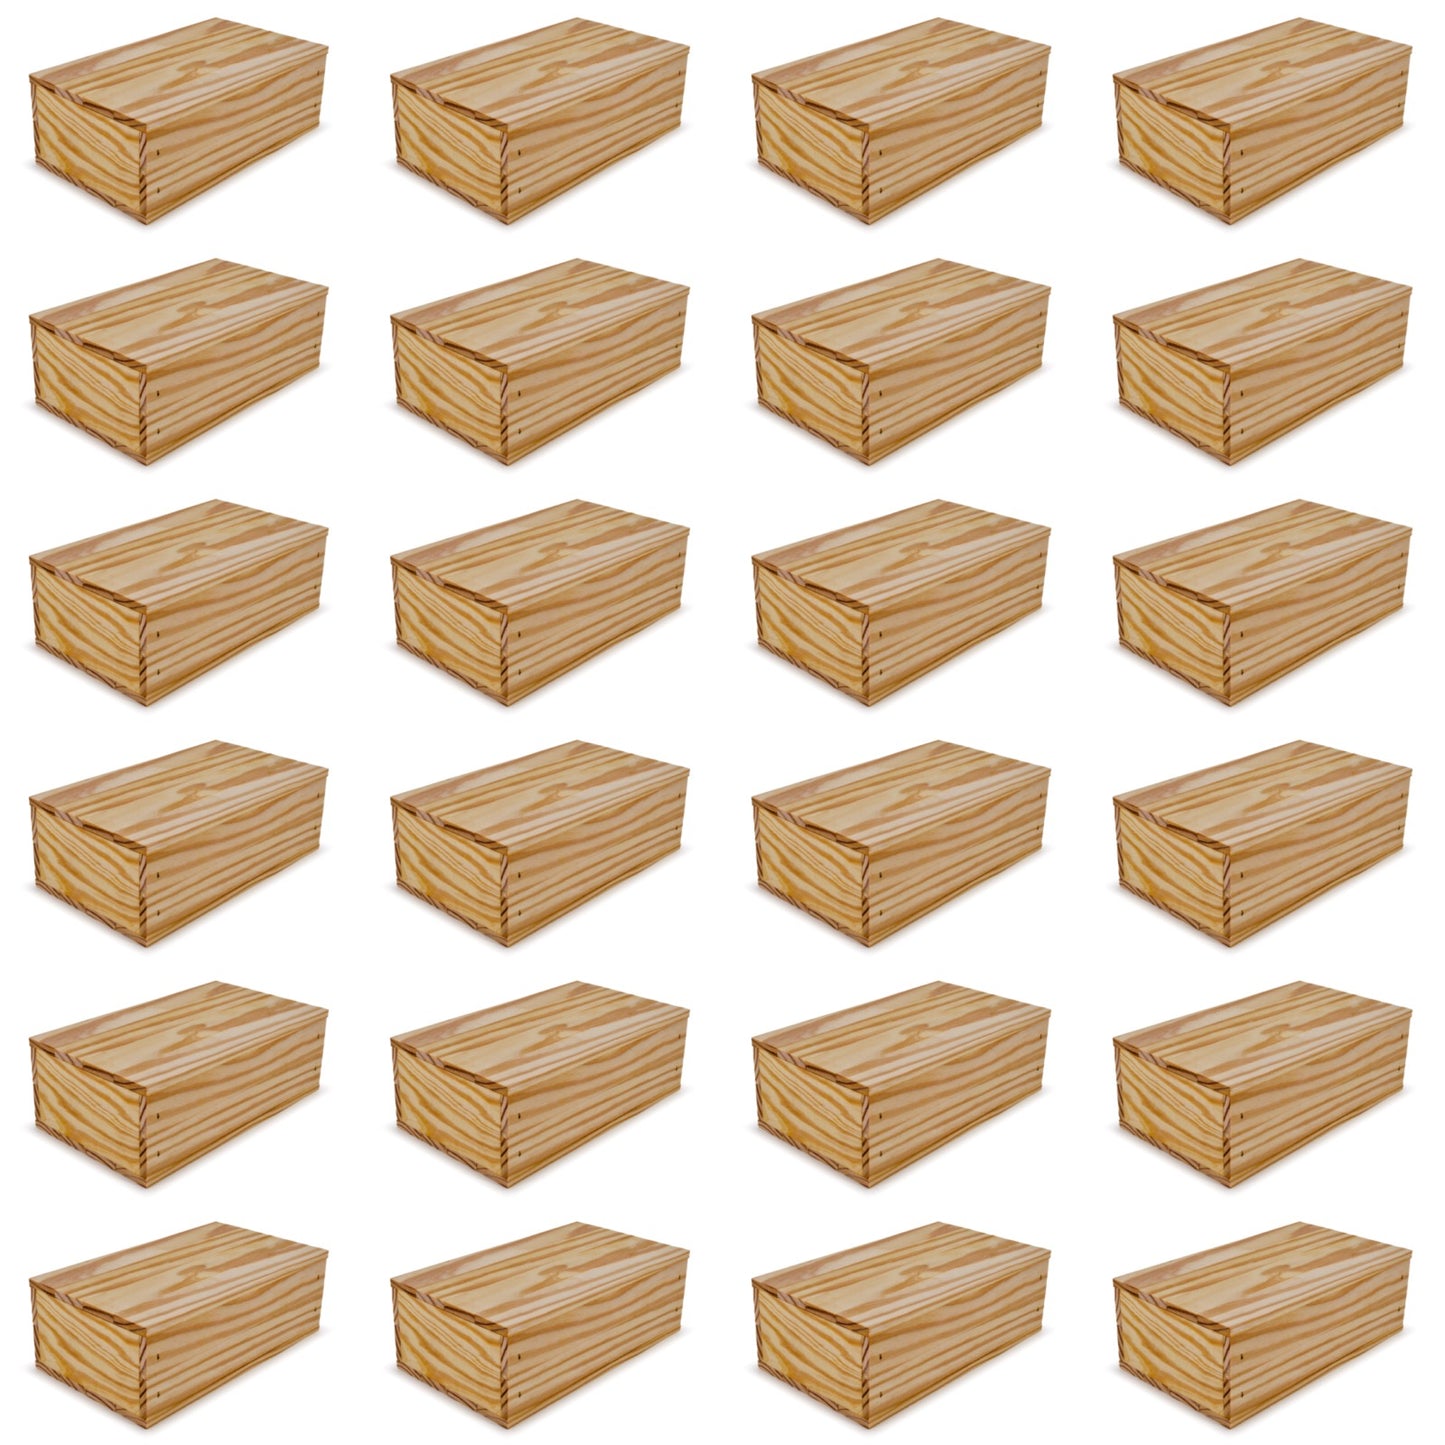 24 Small wooden crates with lid 11x6.25x3.5